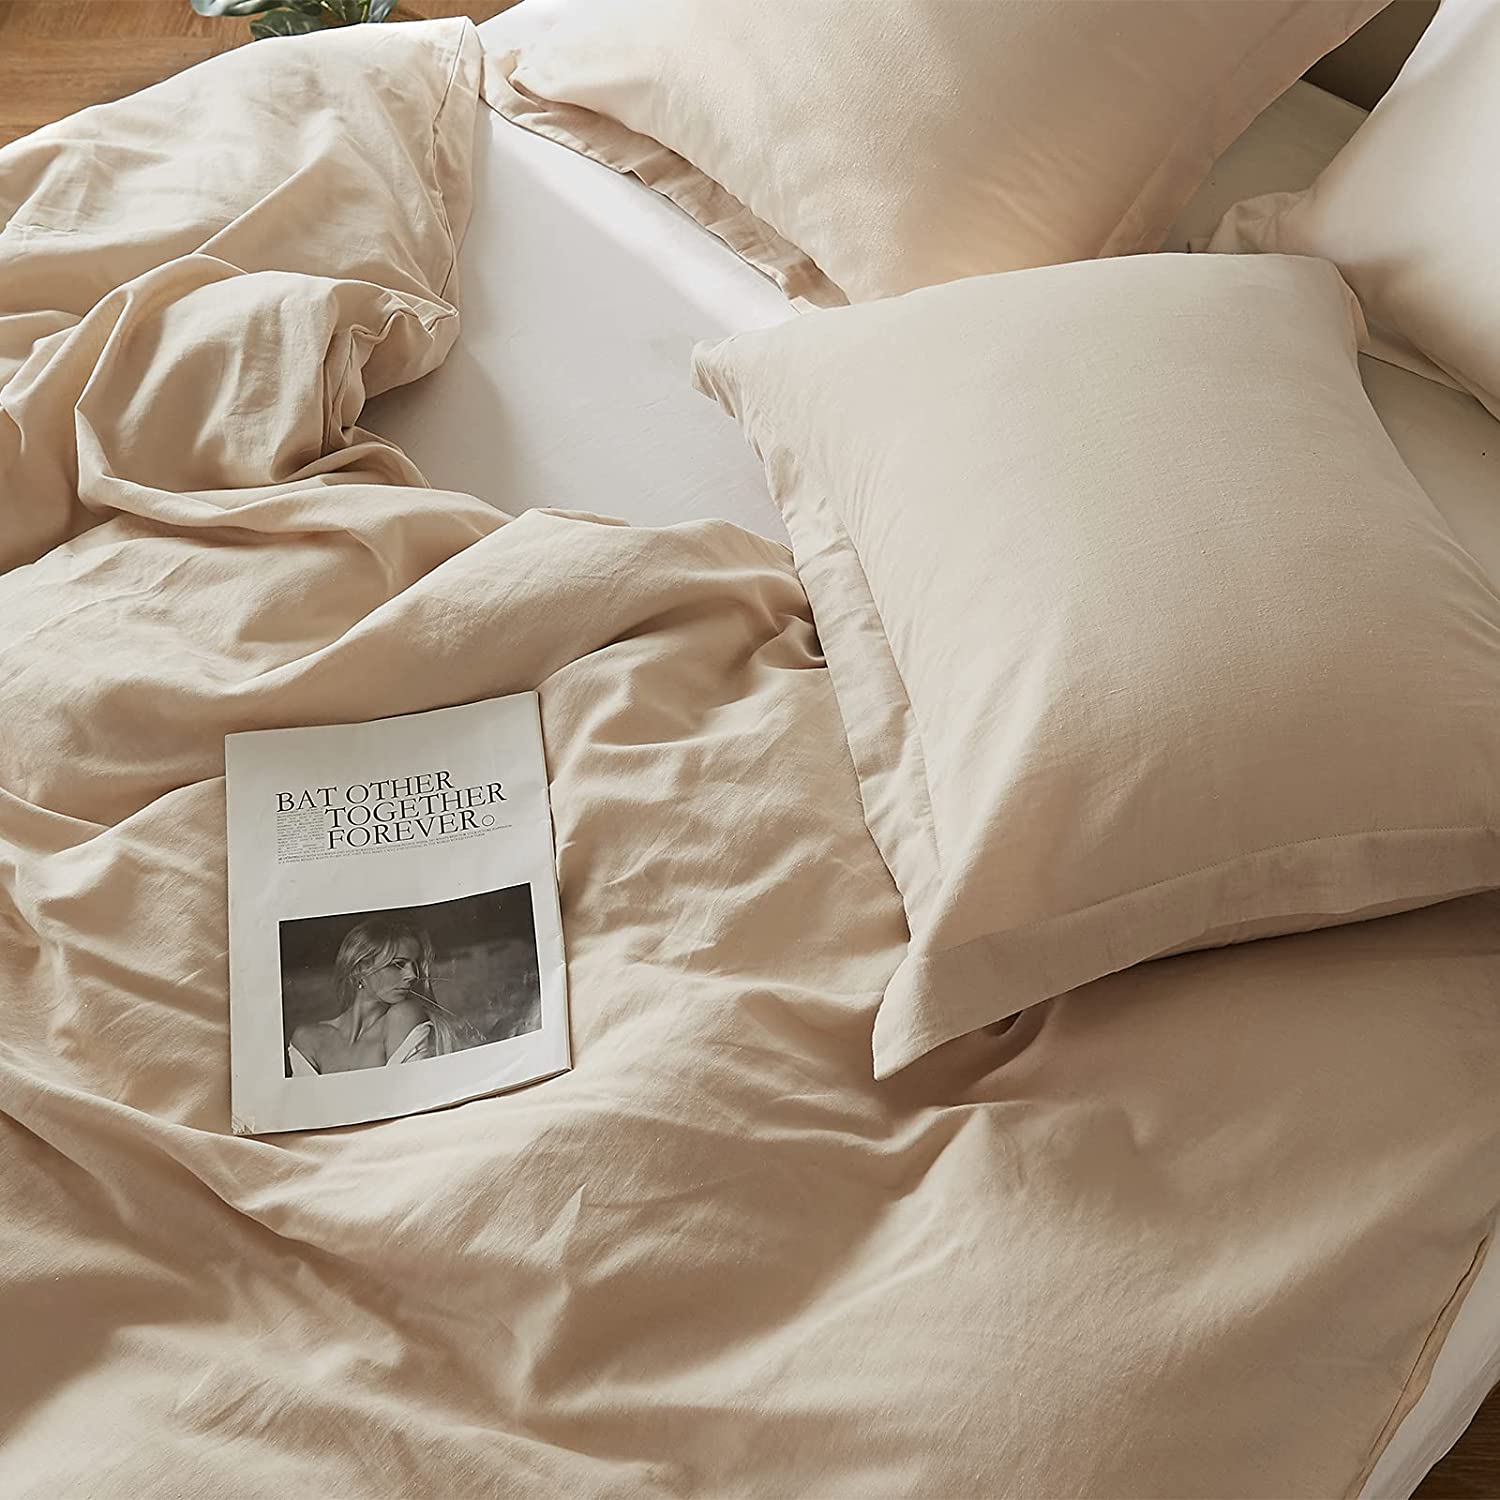 Housse Couette Beige Sable + Taies d'oreillers Offerts